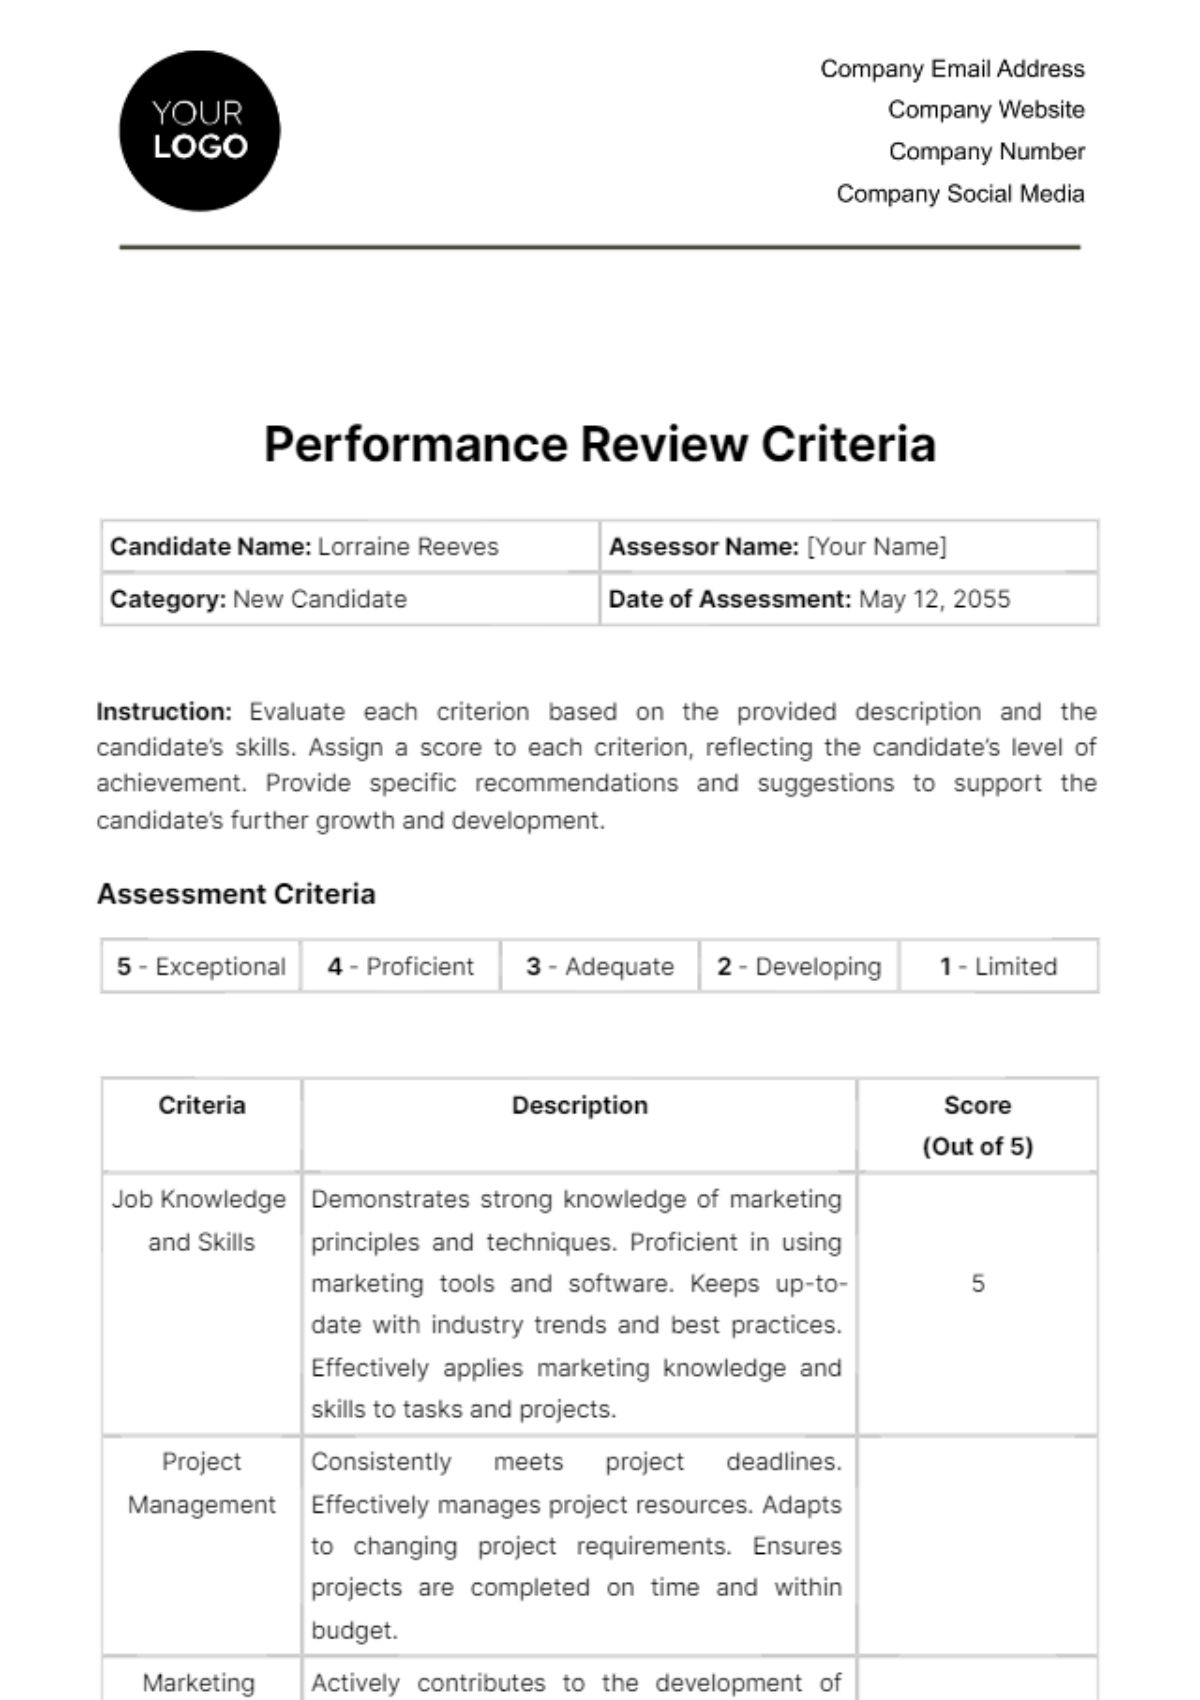 Free Performance Review Criteria HR Template